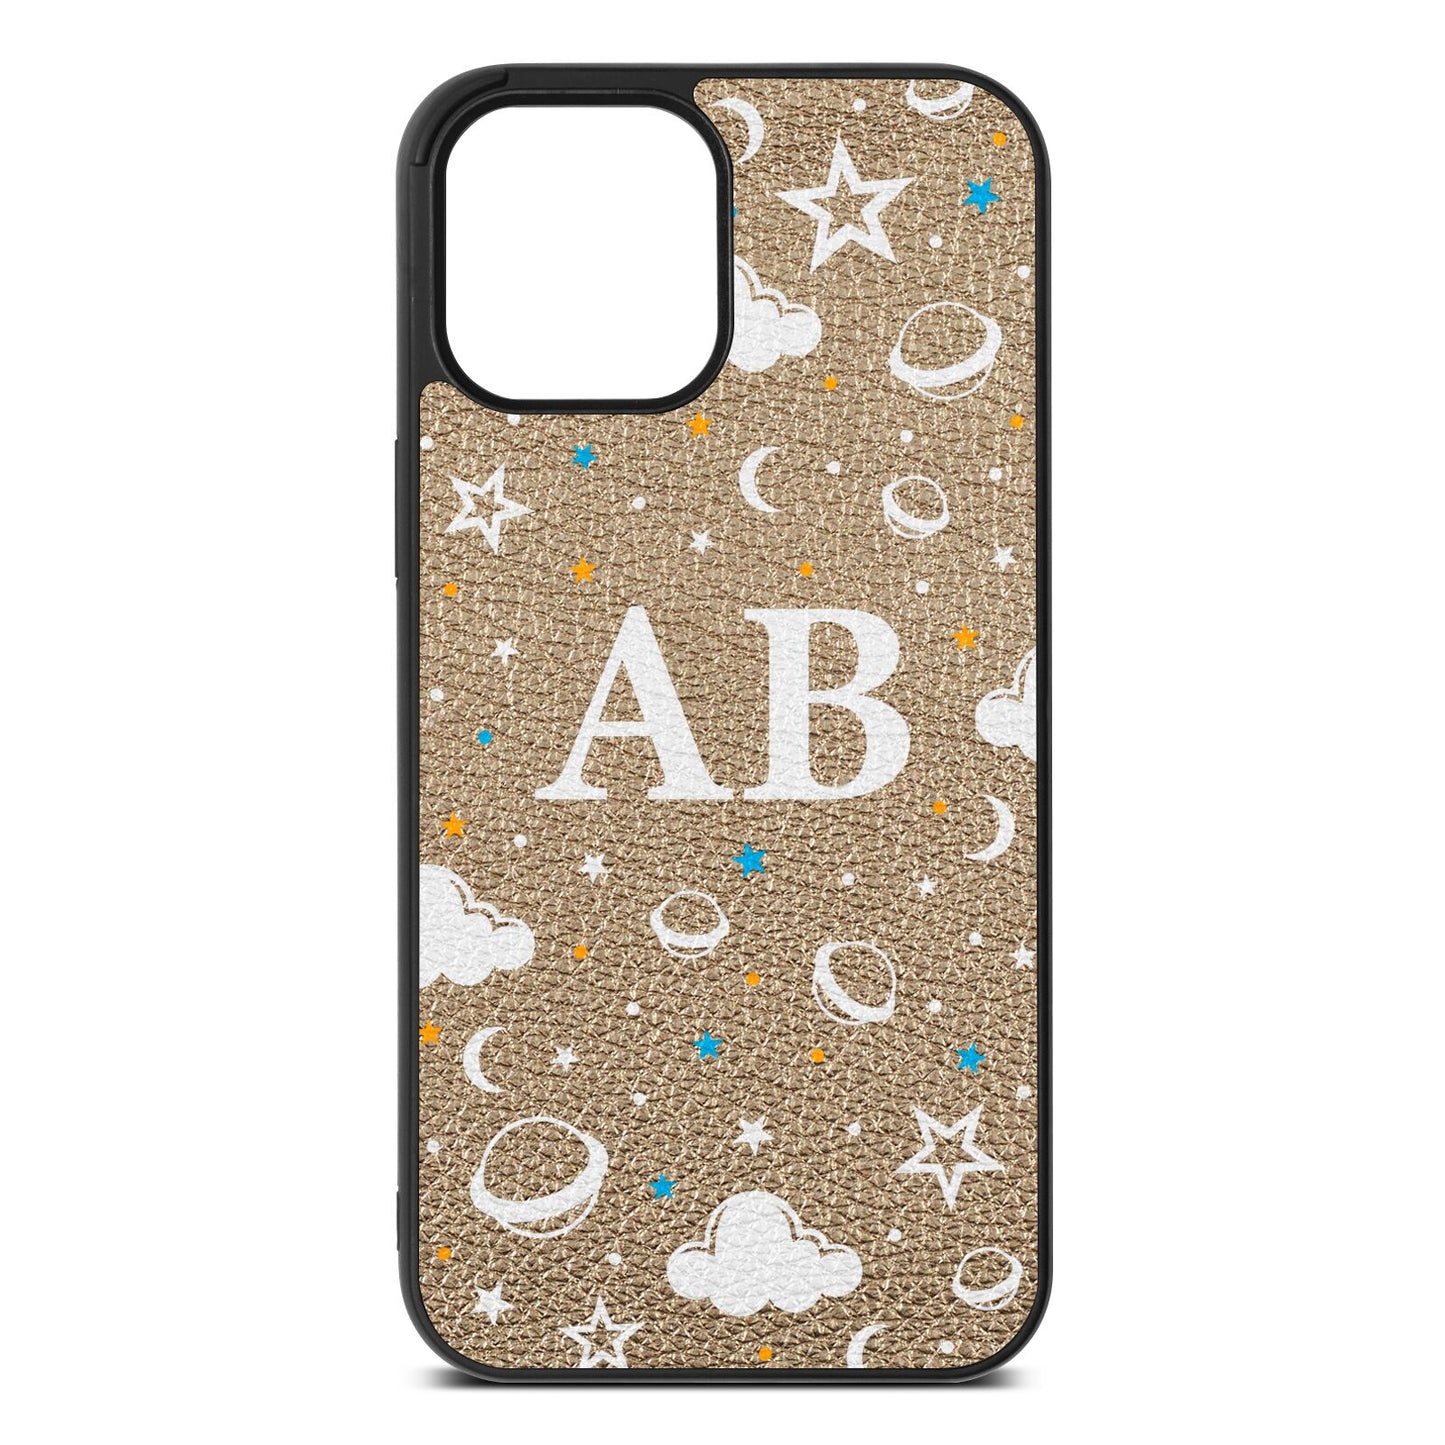 Astronomical Initials Gold Pebble Leather iPhone 12 Pro Max Case